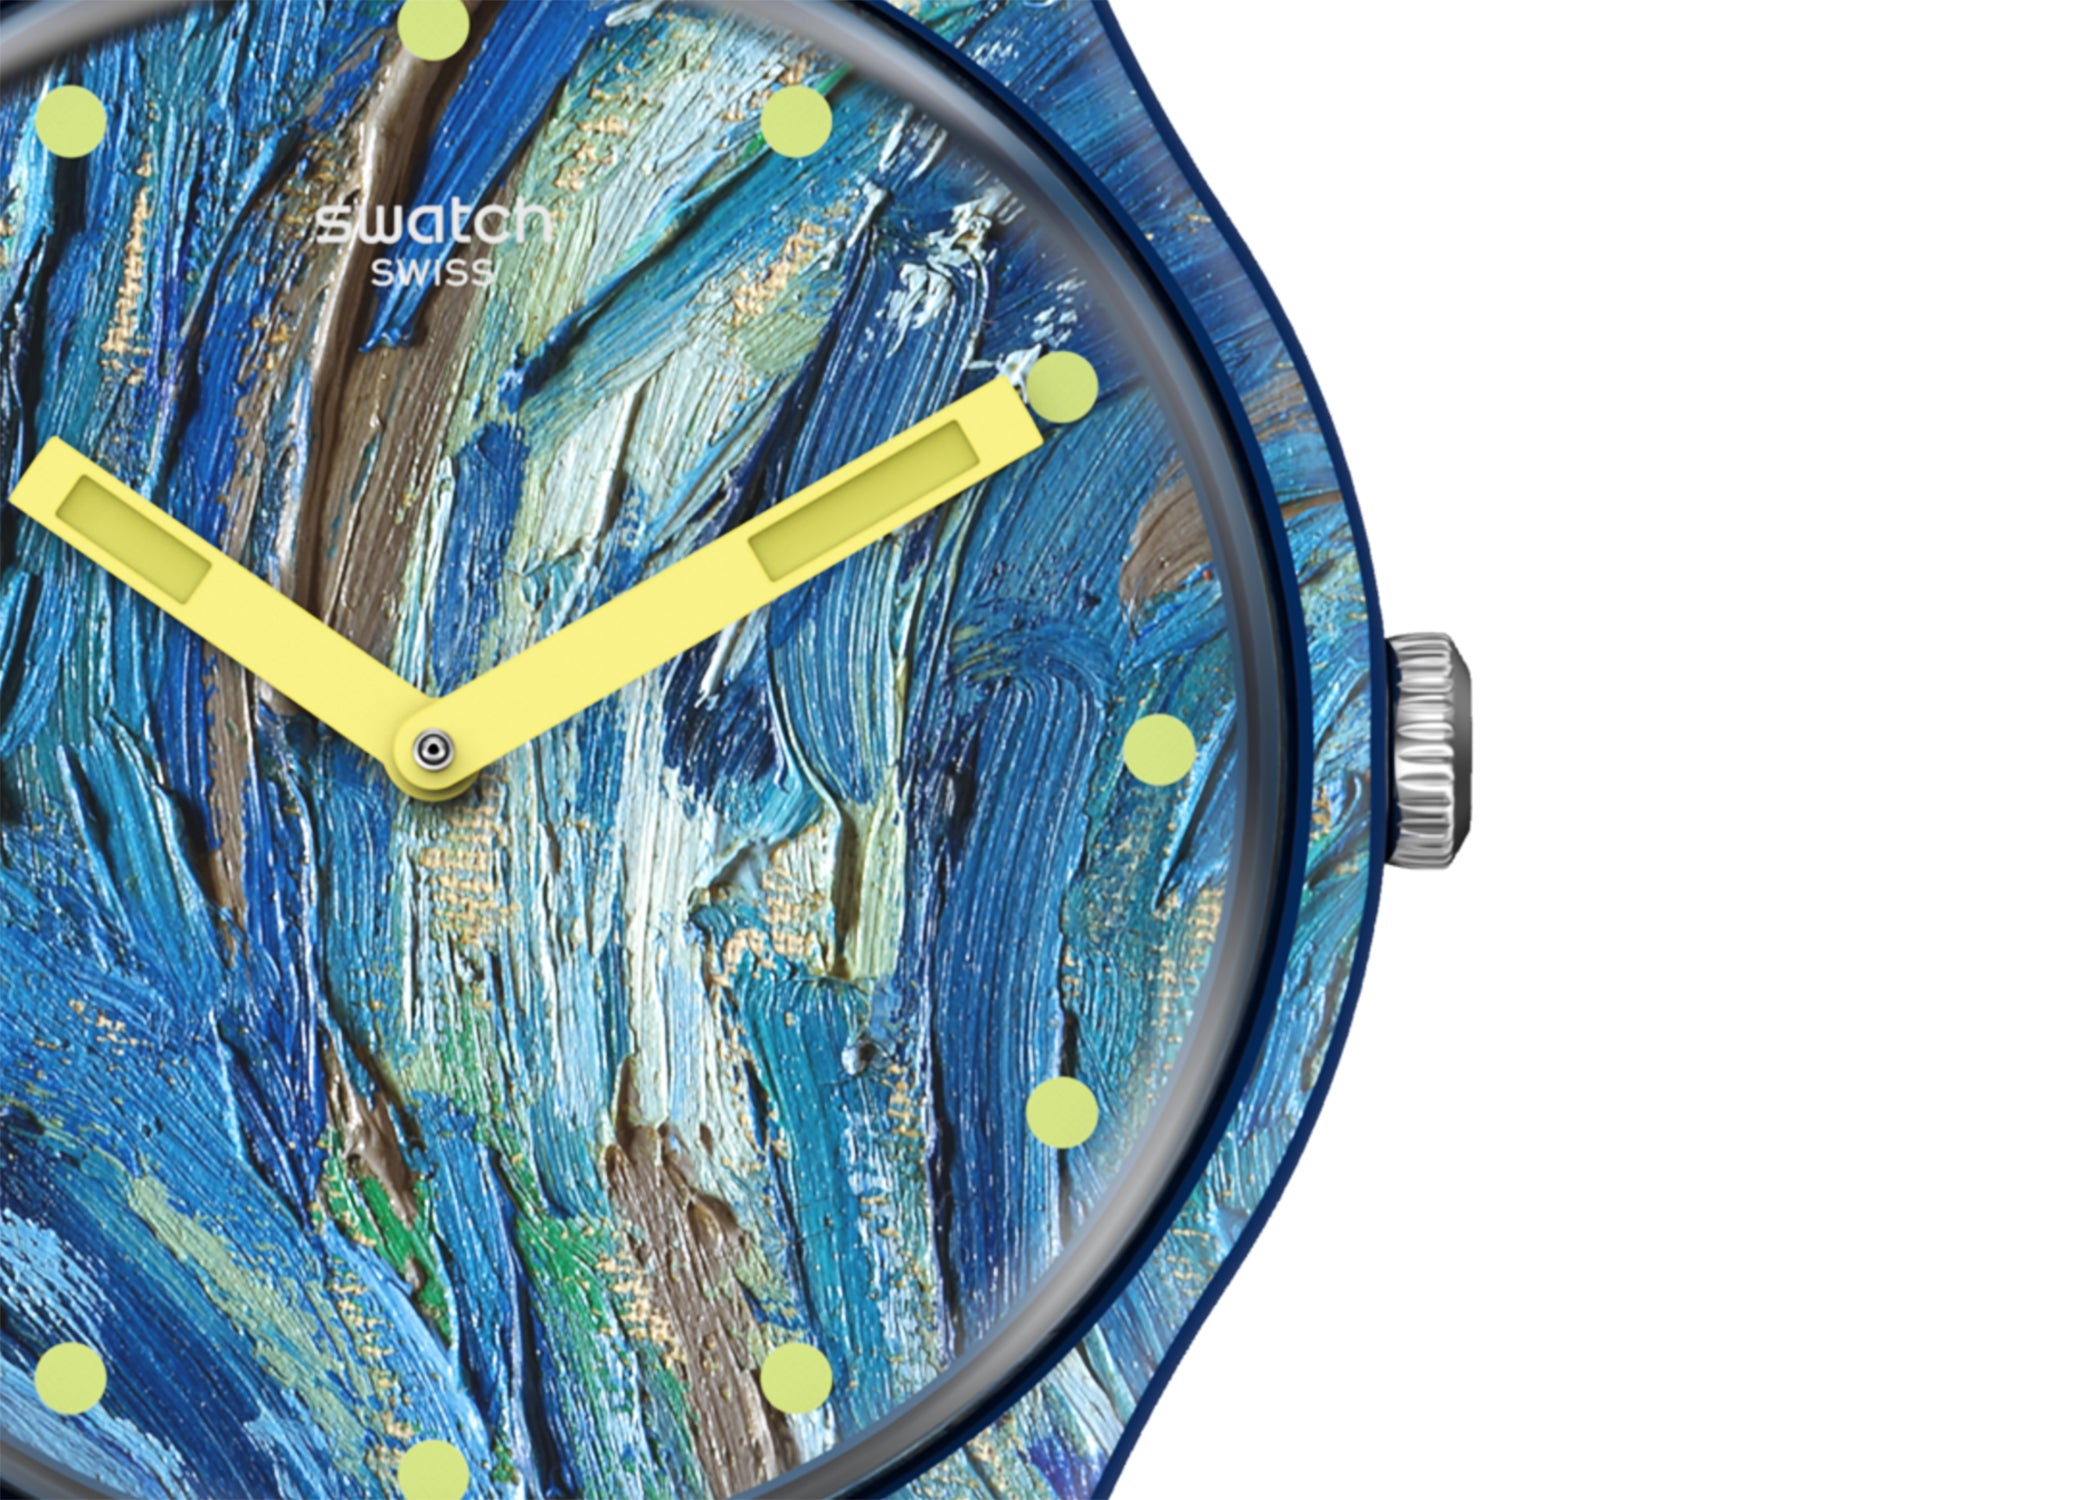 VINCENT VAN GOGH x Swatch 'Starry Night' Collectible Watch